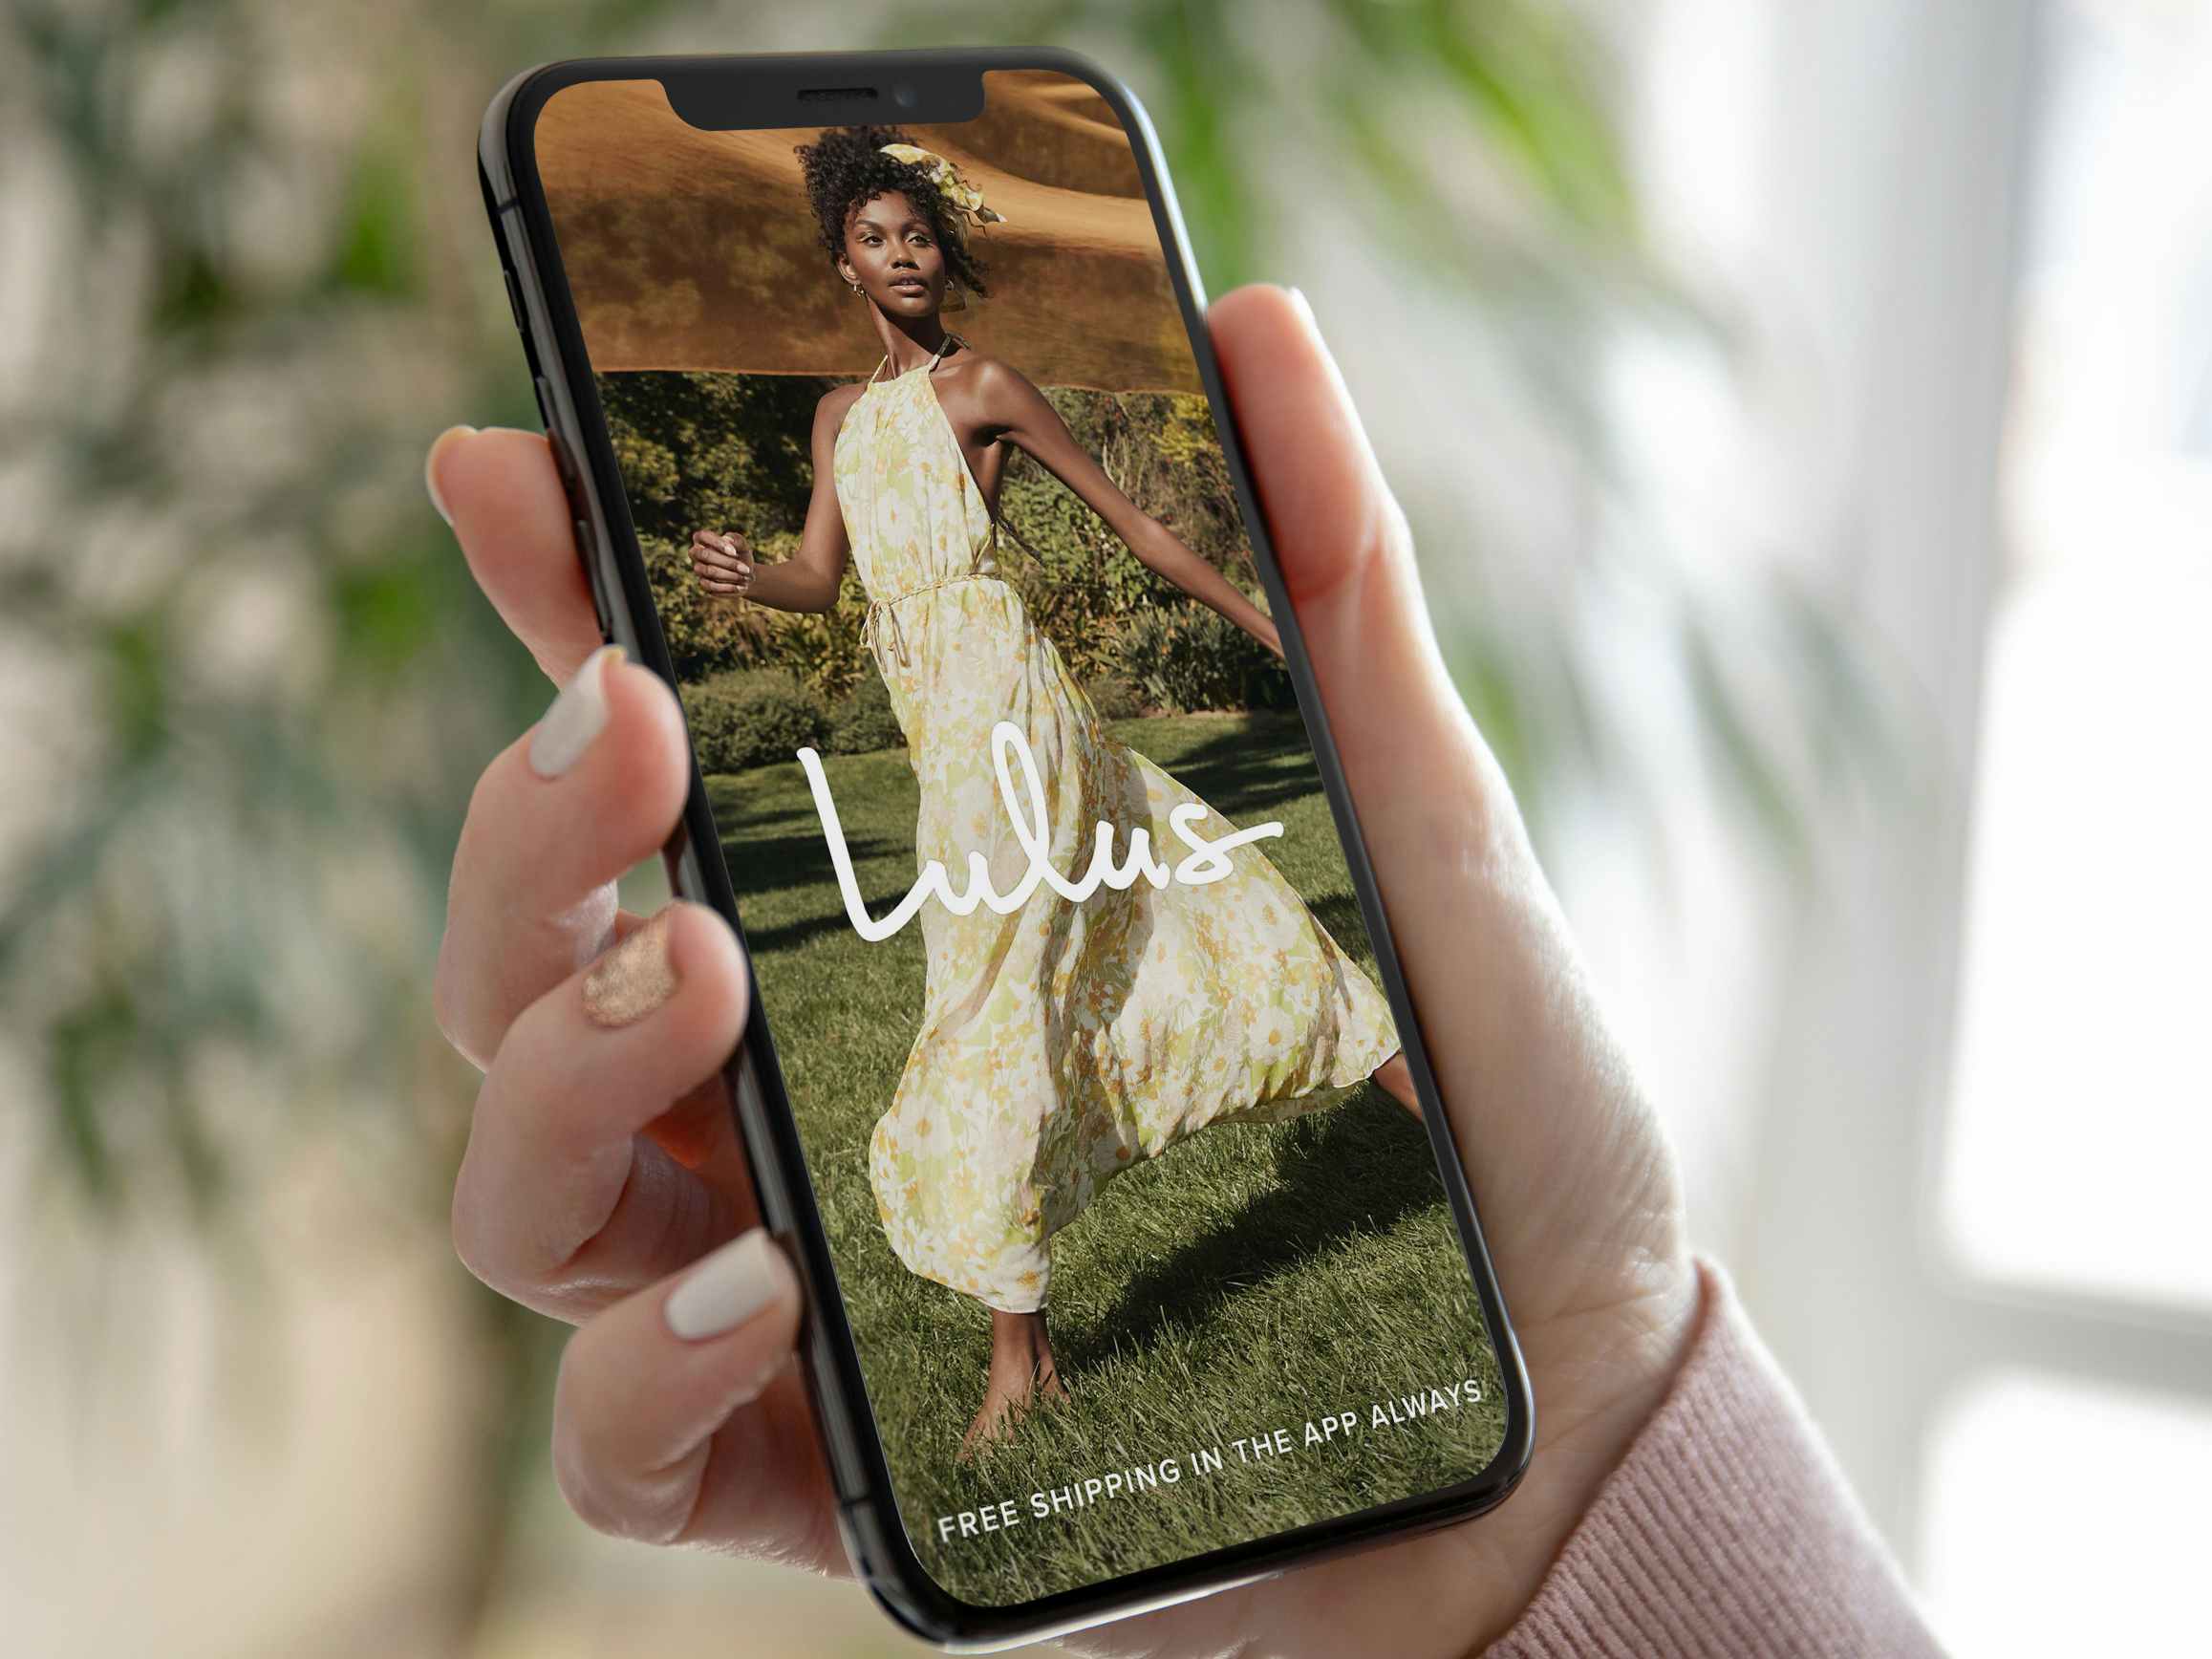 A person holding a cell phone displaying the Lulu's app information about free shipping when you use the app.